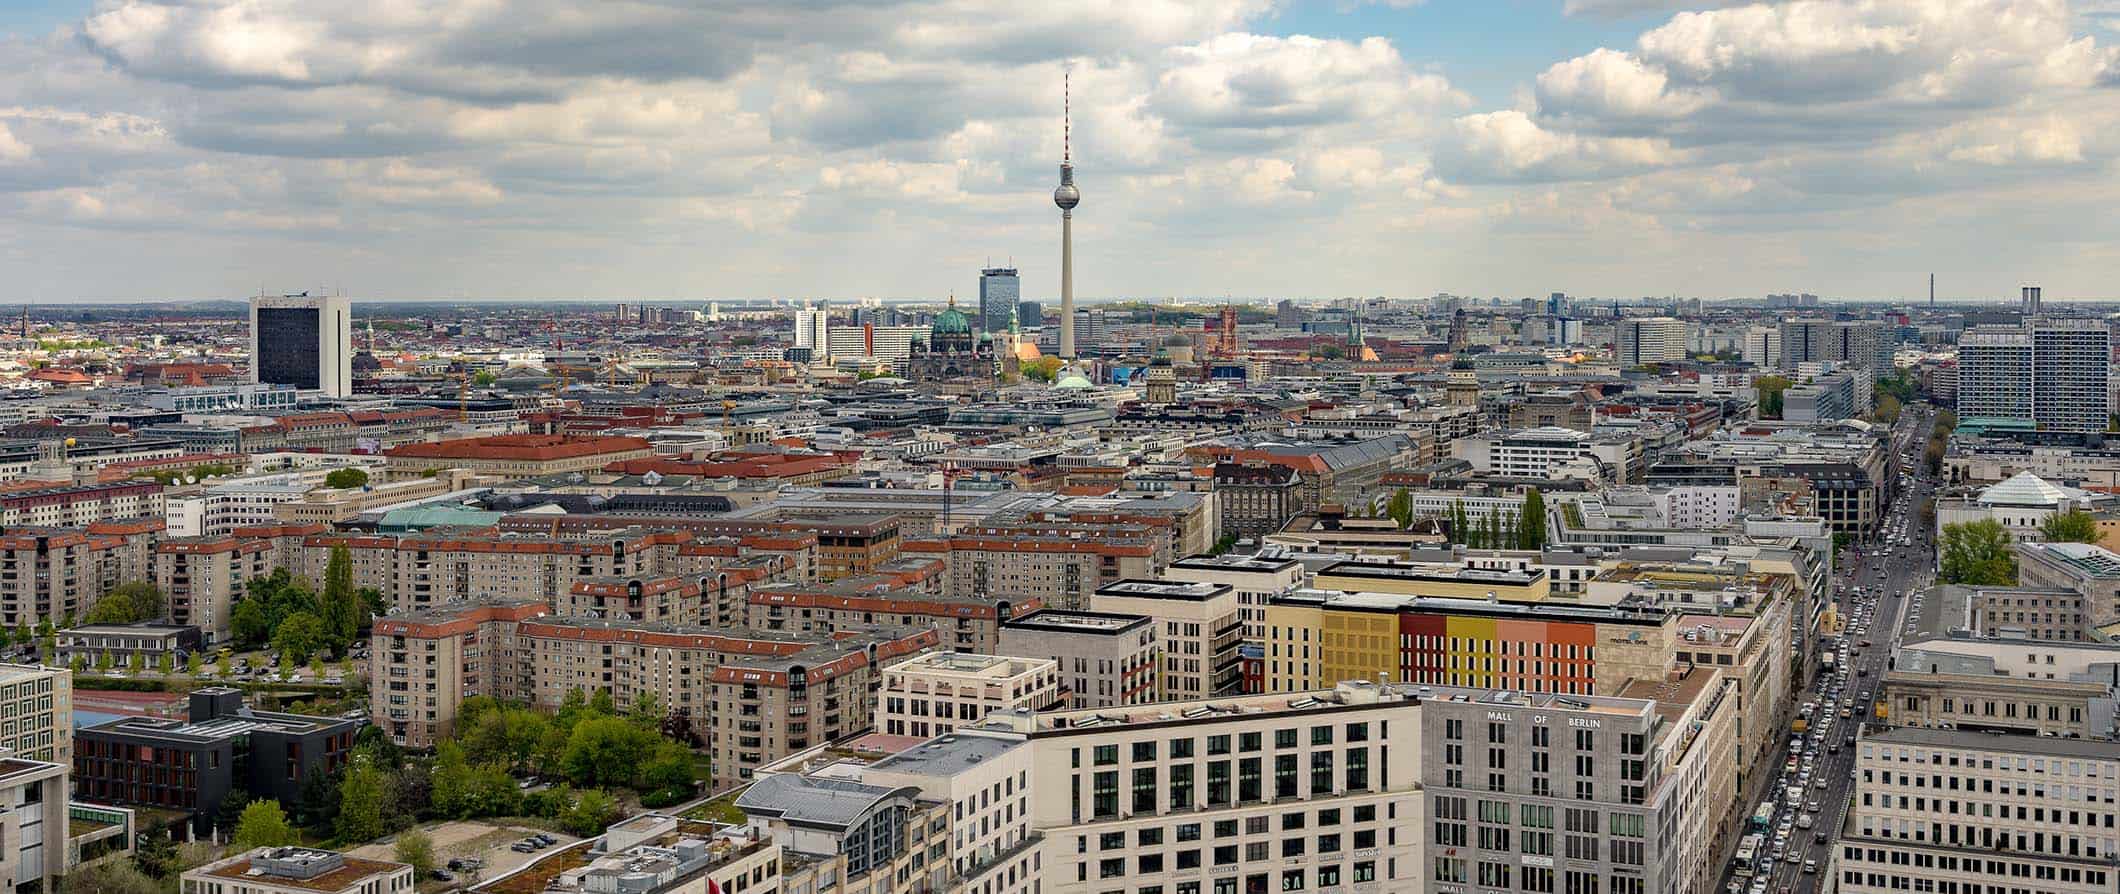 view of Berlin's rooftops and the TV tower